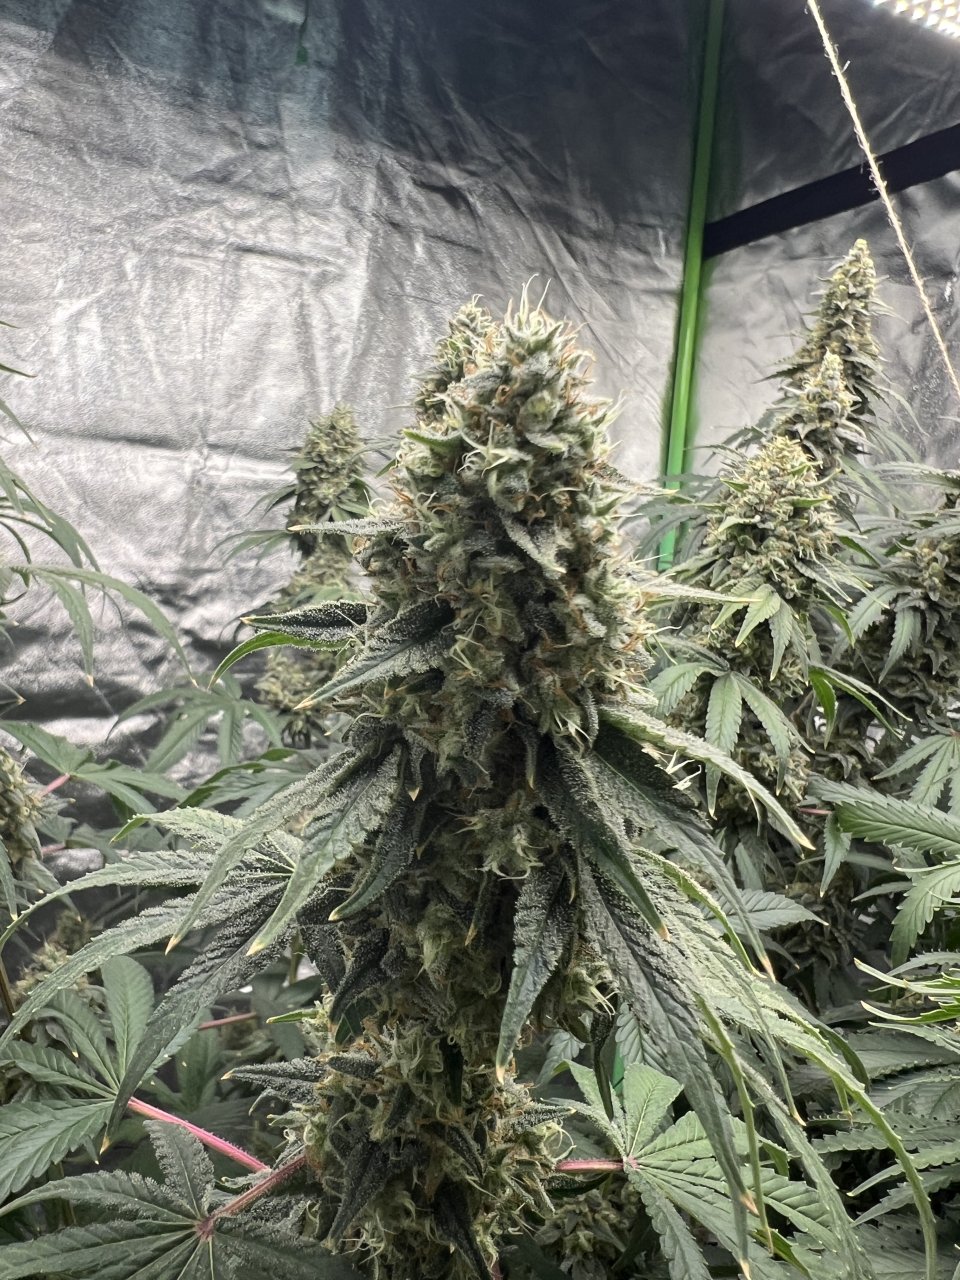 Banner flower Day 80 and day 52 of flower (week 7.5)